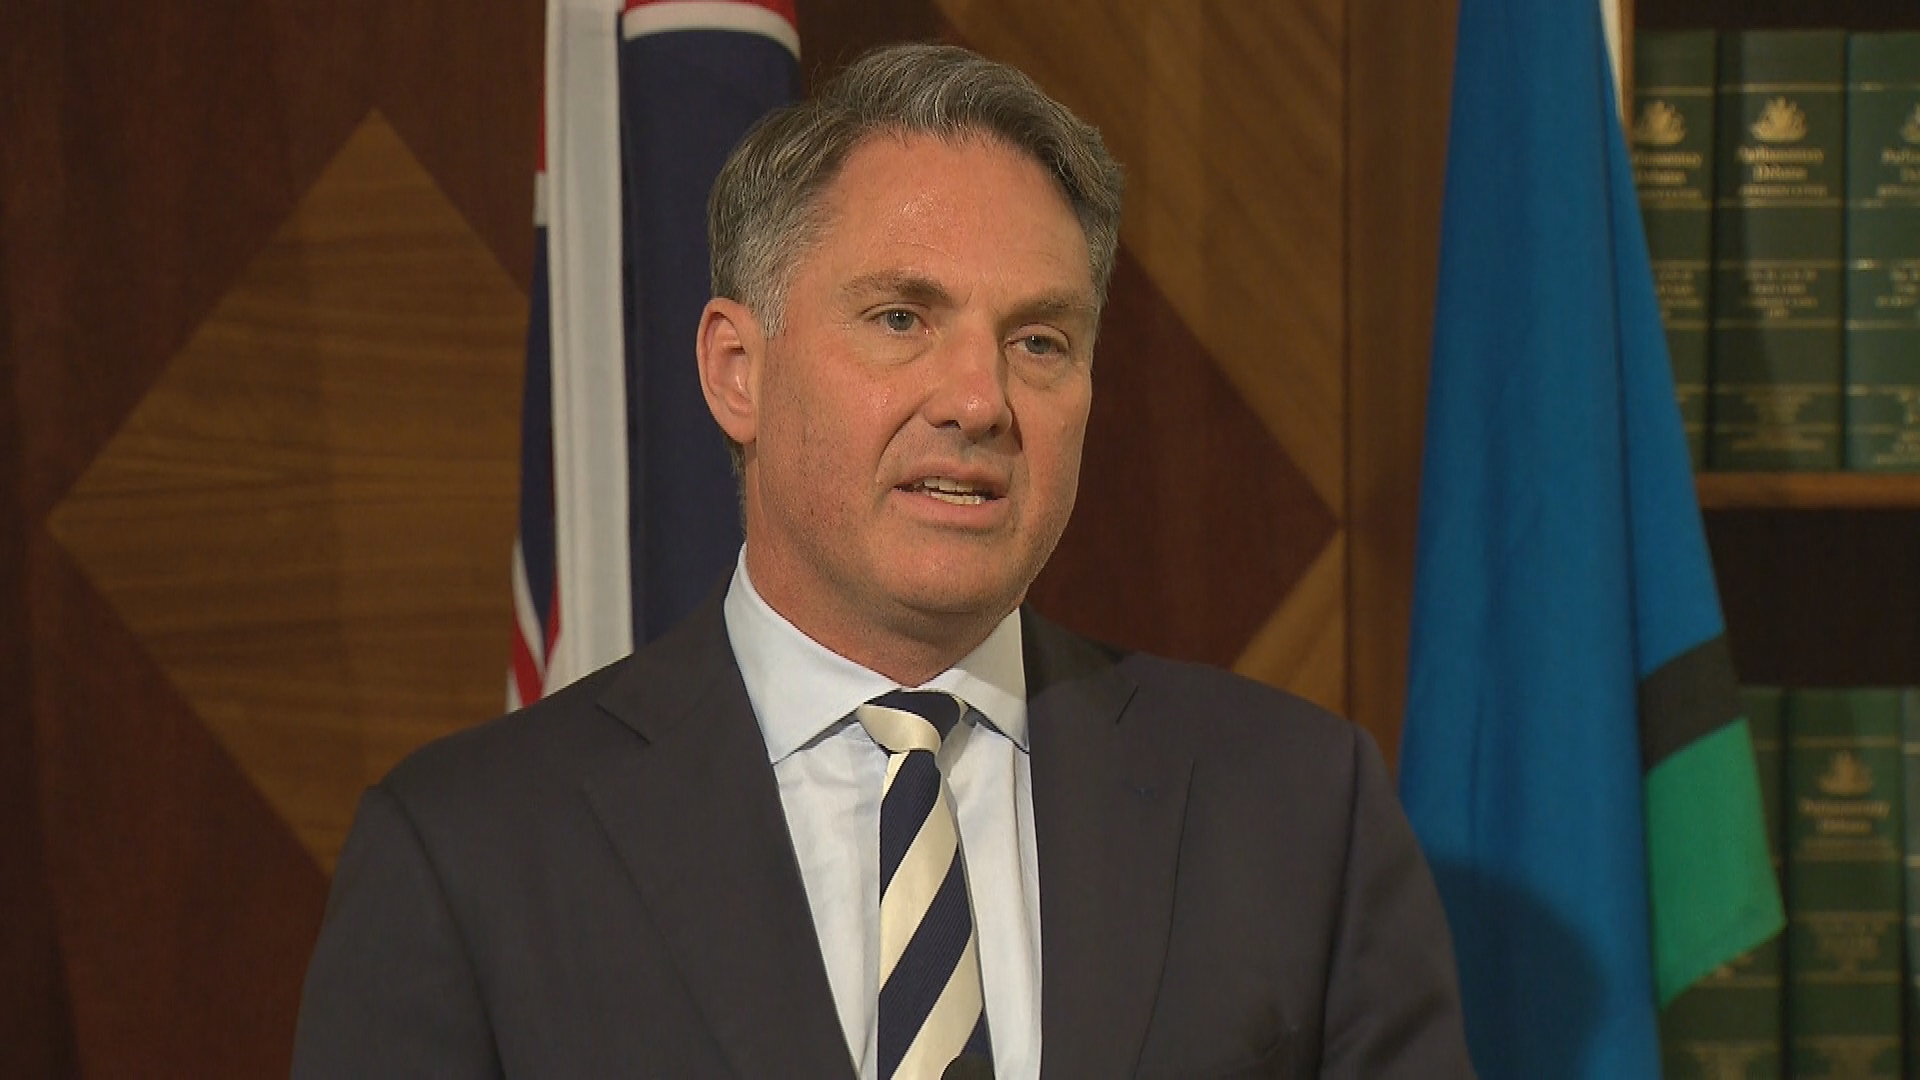 Deputy Prime Minister Richard Marles says the new government is looking into whether the former prime minister's office sent an election day text about an asylum seeker boat.